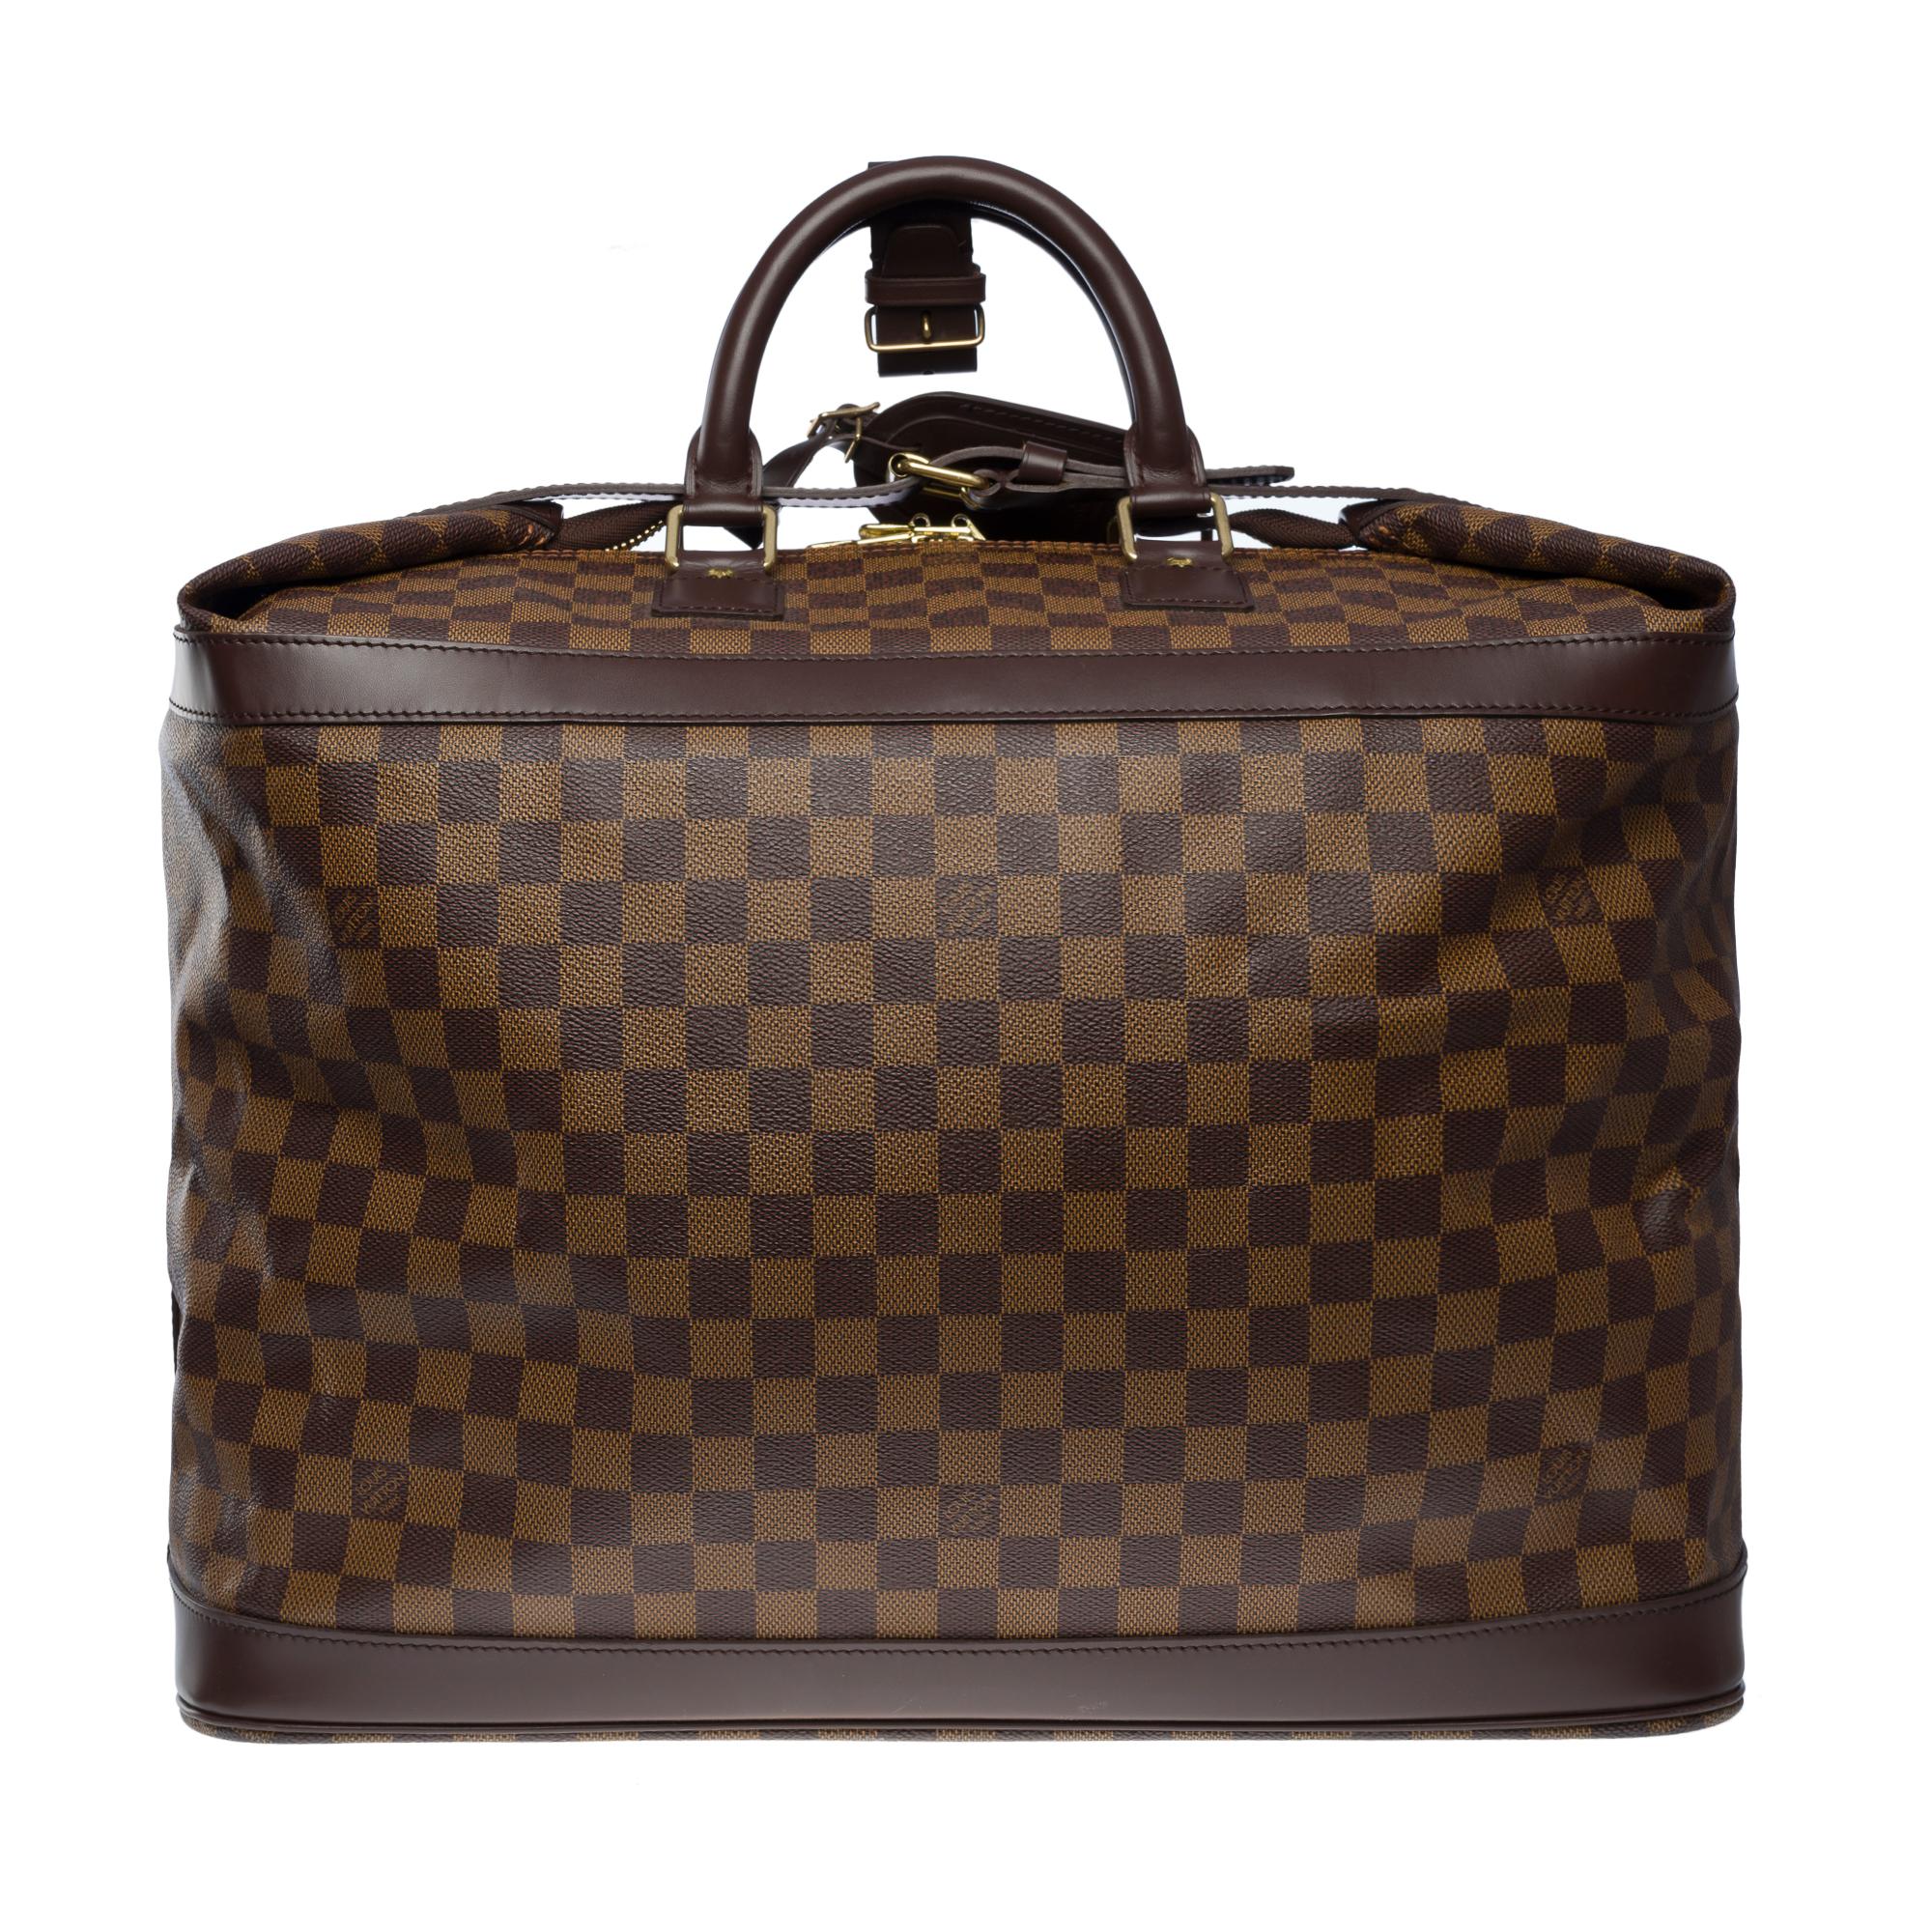 The indispensable Louis Vuitton Cruiser 45 travel bag in ebony checkered canvas, gold metal hardware
Central zip closure on top and leather strap
Brown leather handles
Brown canvas interior
5 feet of gold metal base
Signature: 